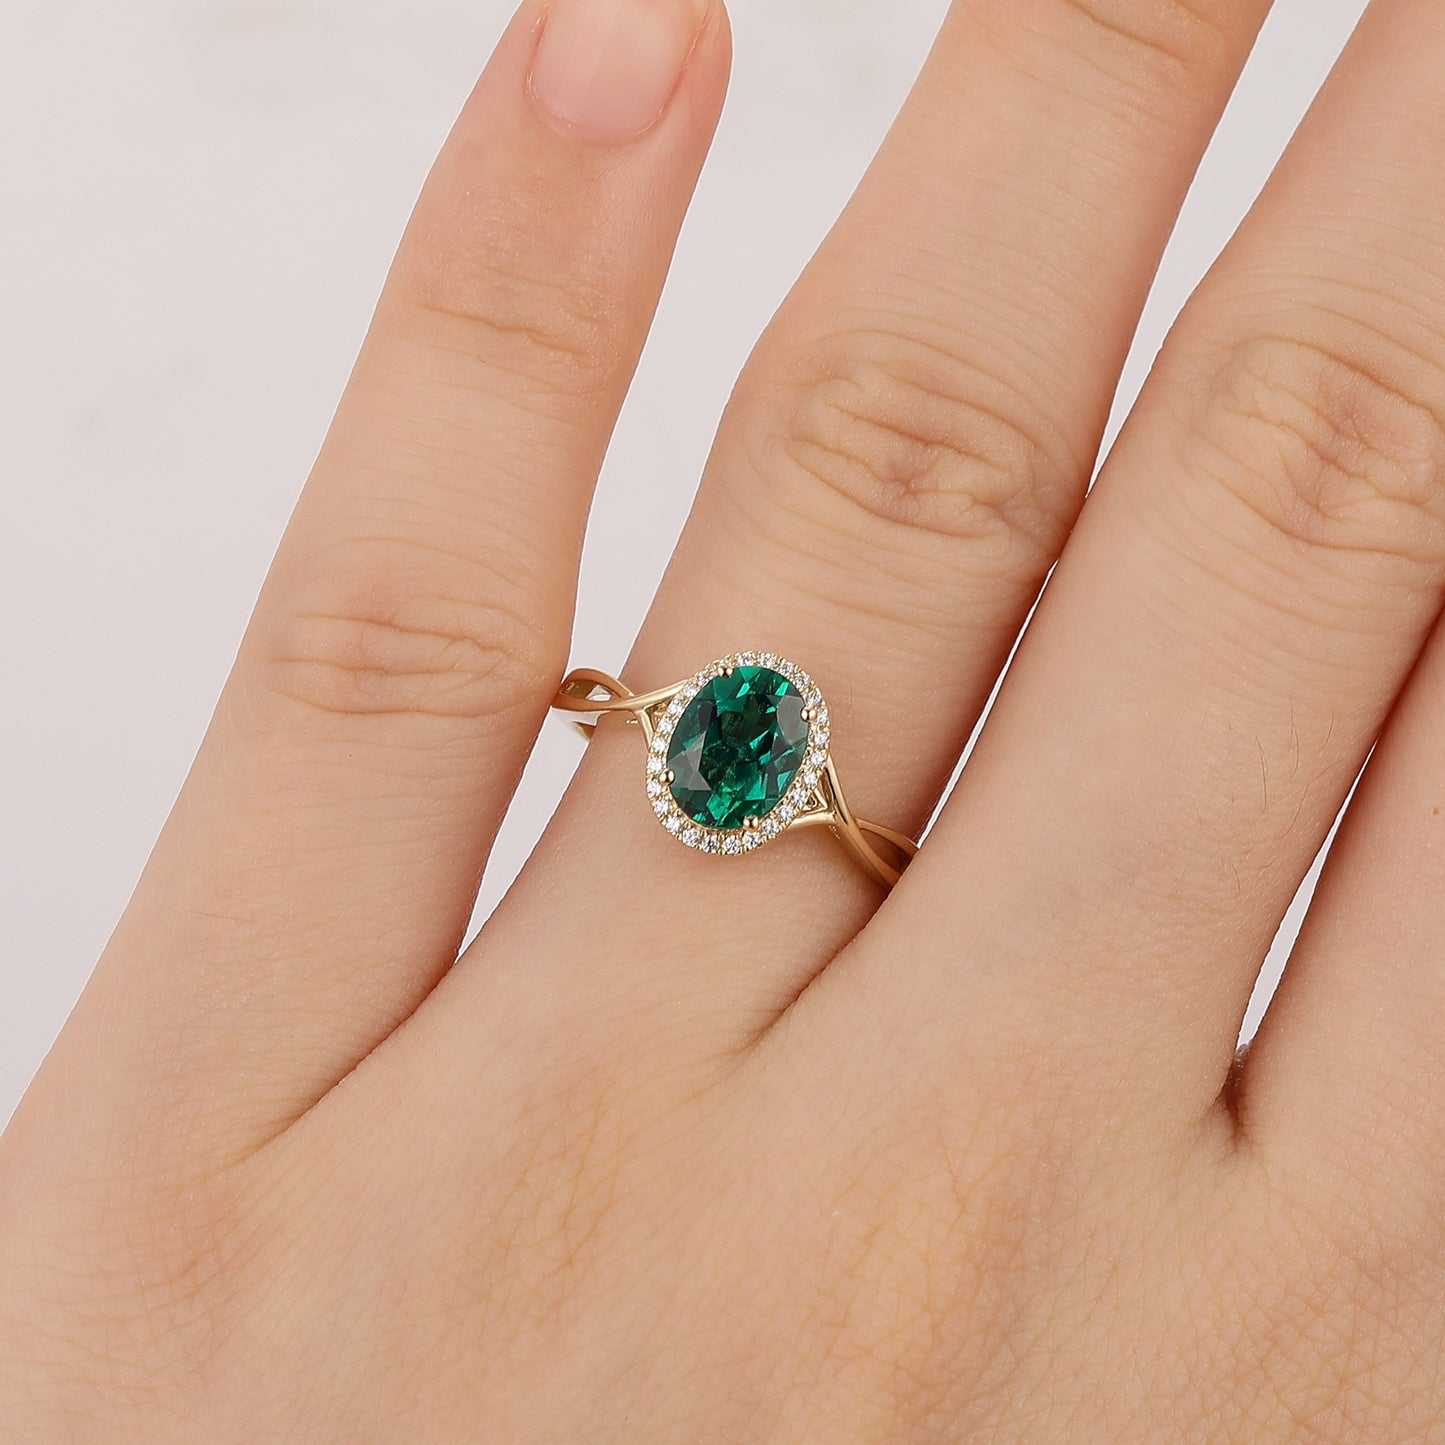 G005 Delicate 1.00 Carat Oval Cut Halo Emerald Twisted Anniversary Engagement Ring For Women